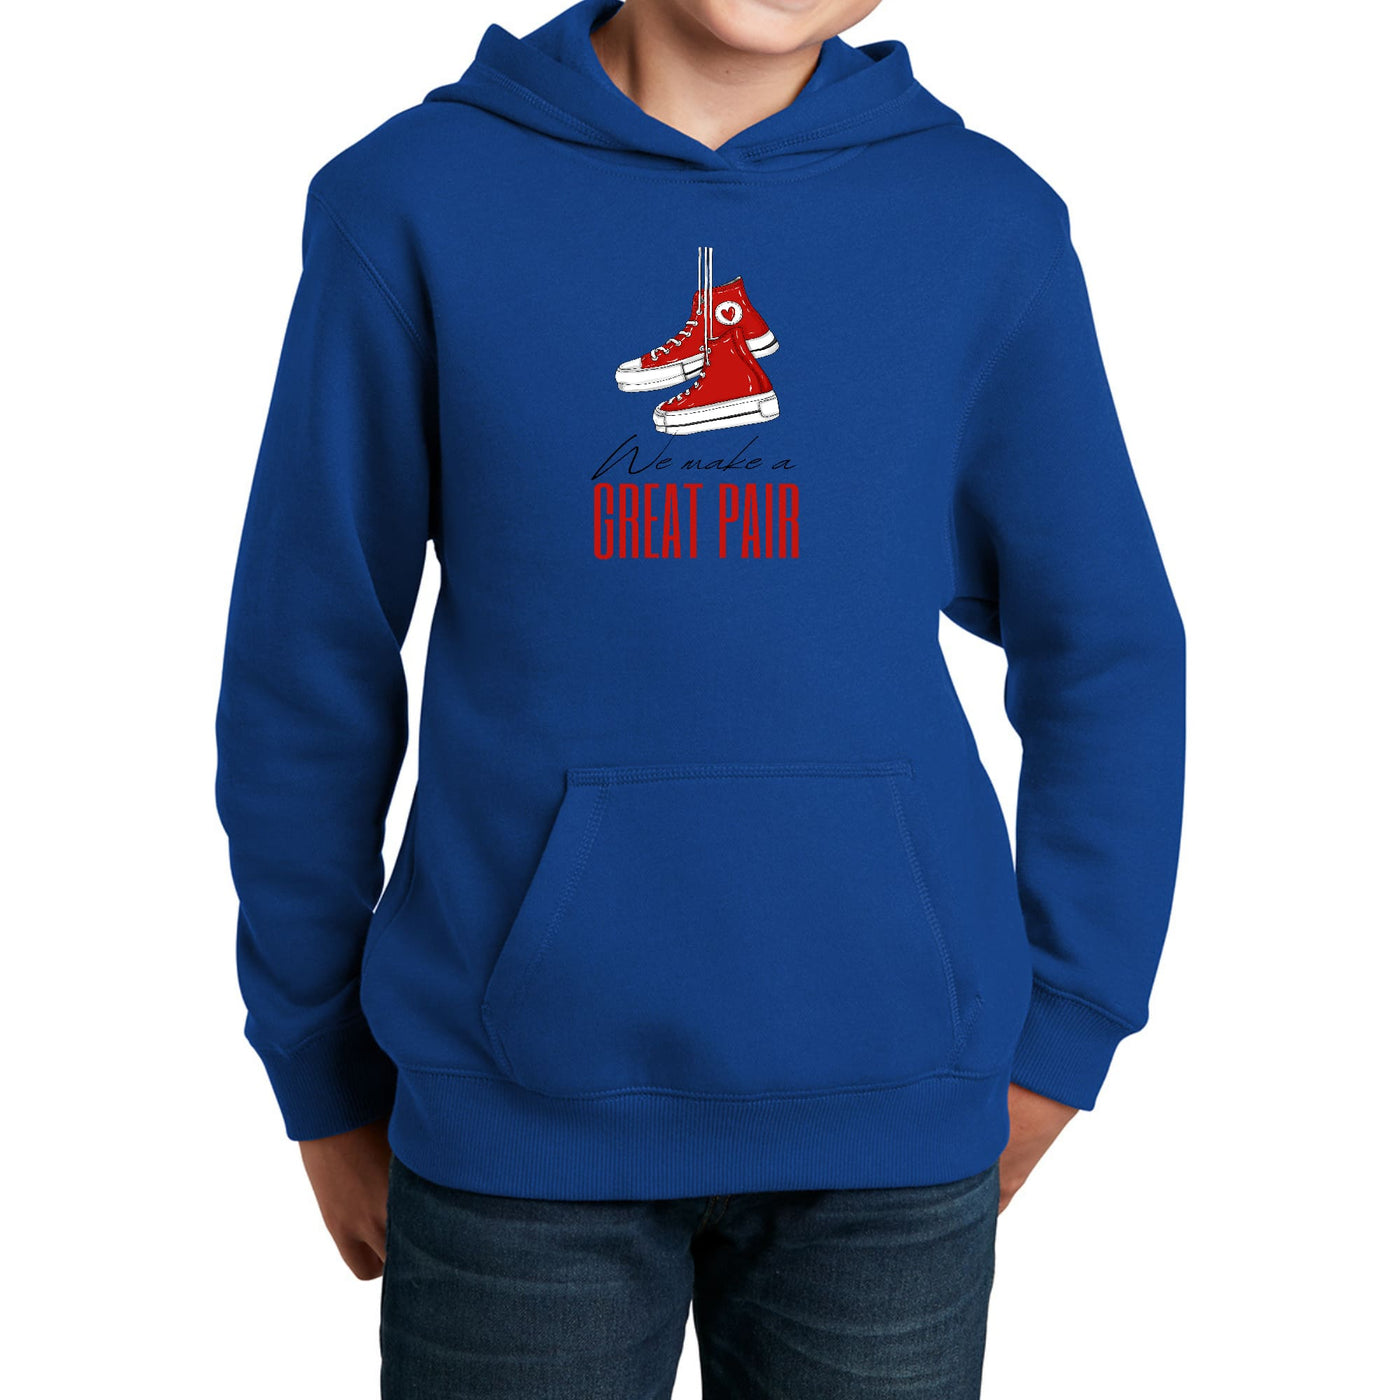 Youth Graphic Hoodie Say It Soul We Make a Great Pair Red - Youth | Hoodies